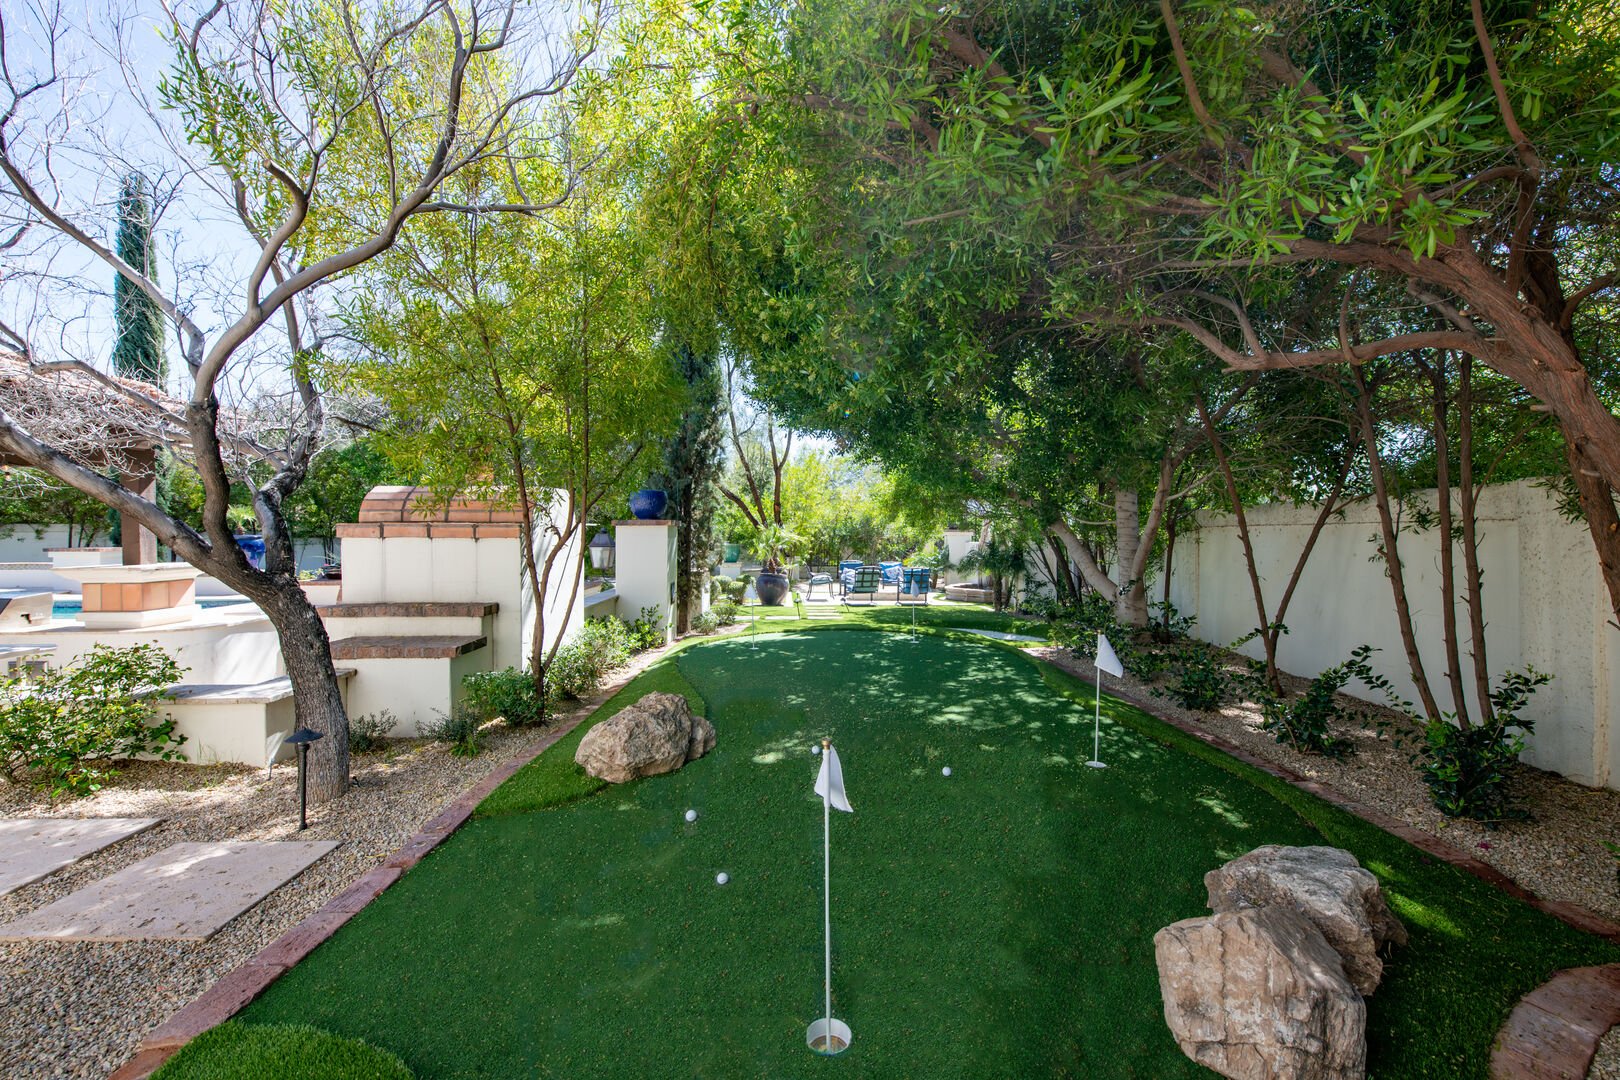 Practice your short game while relaxing in the shade at Valley Vista.